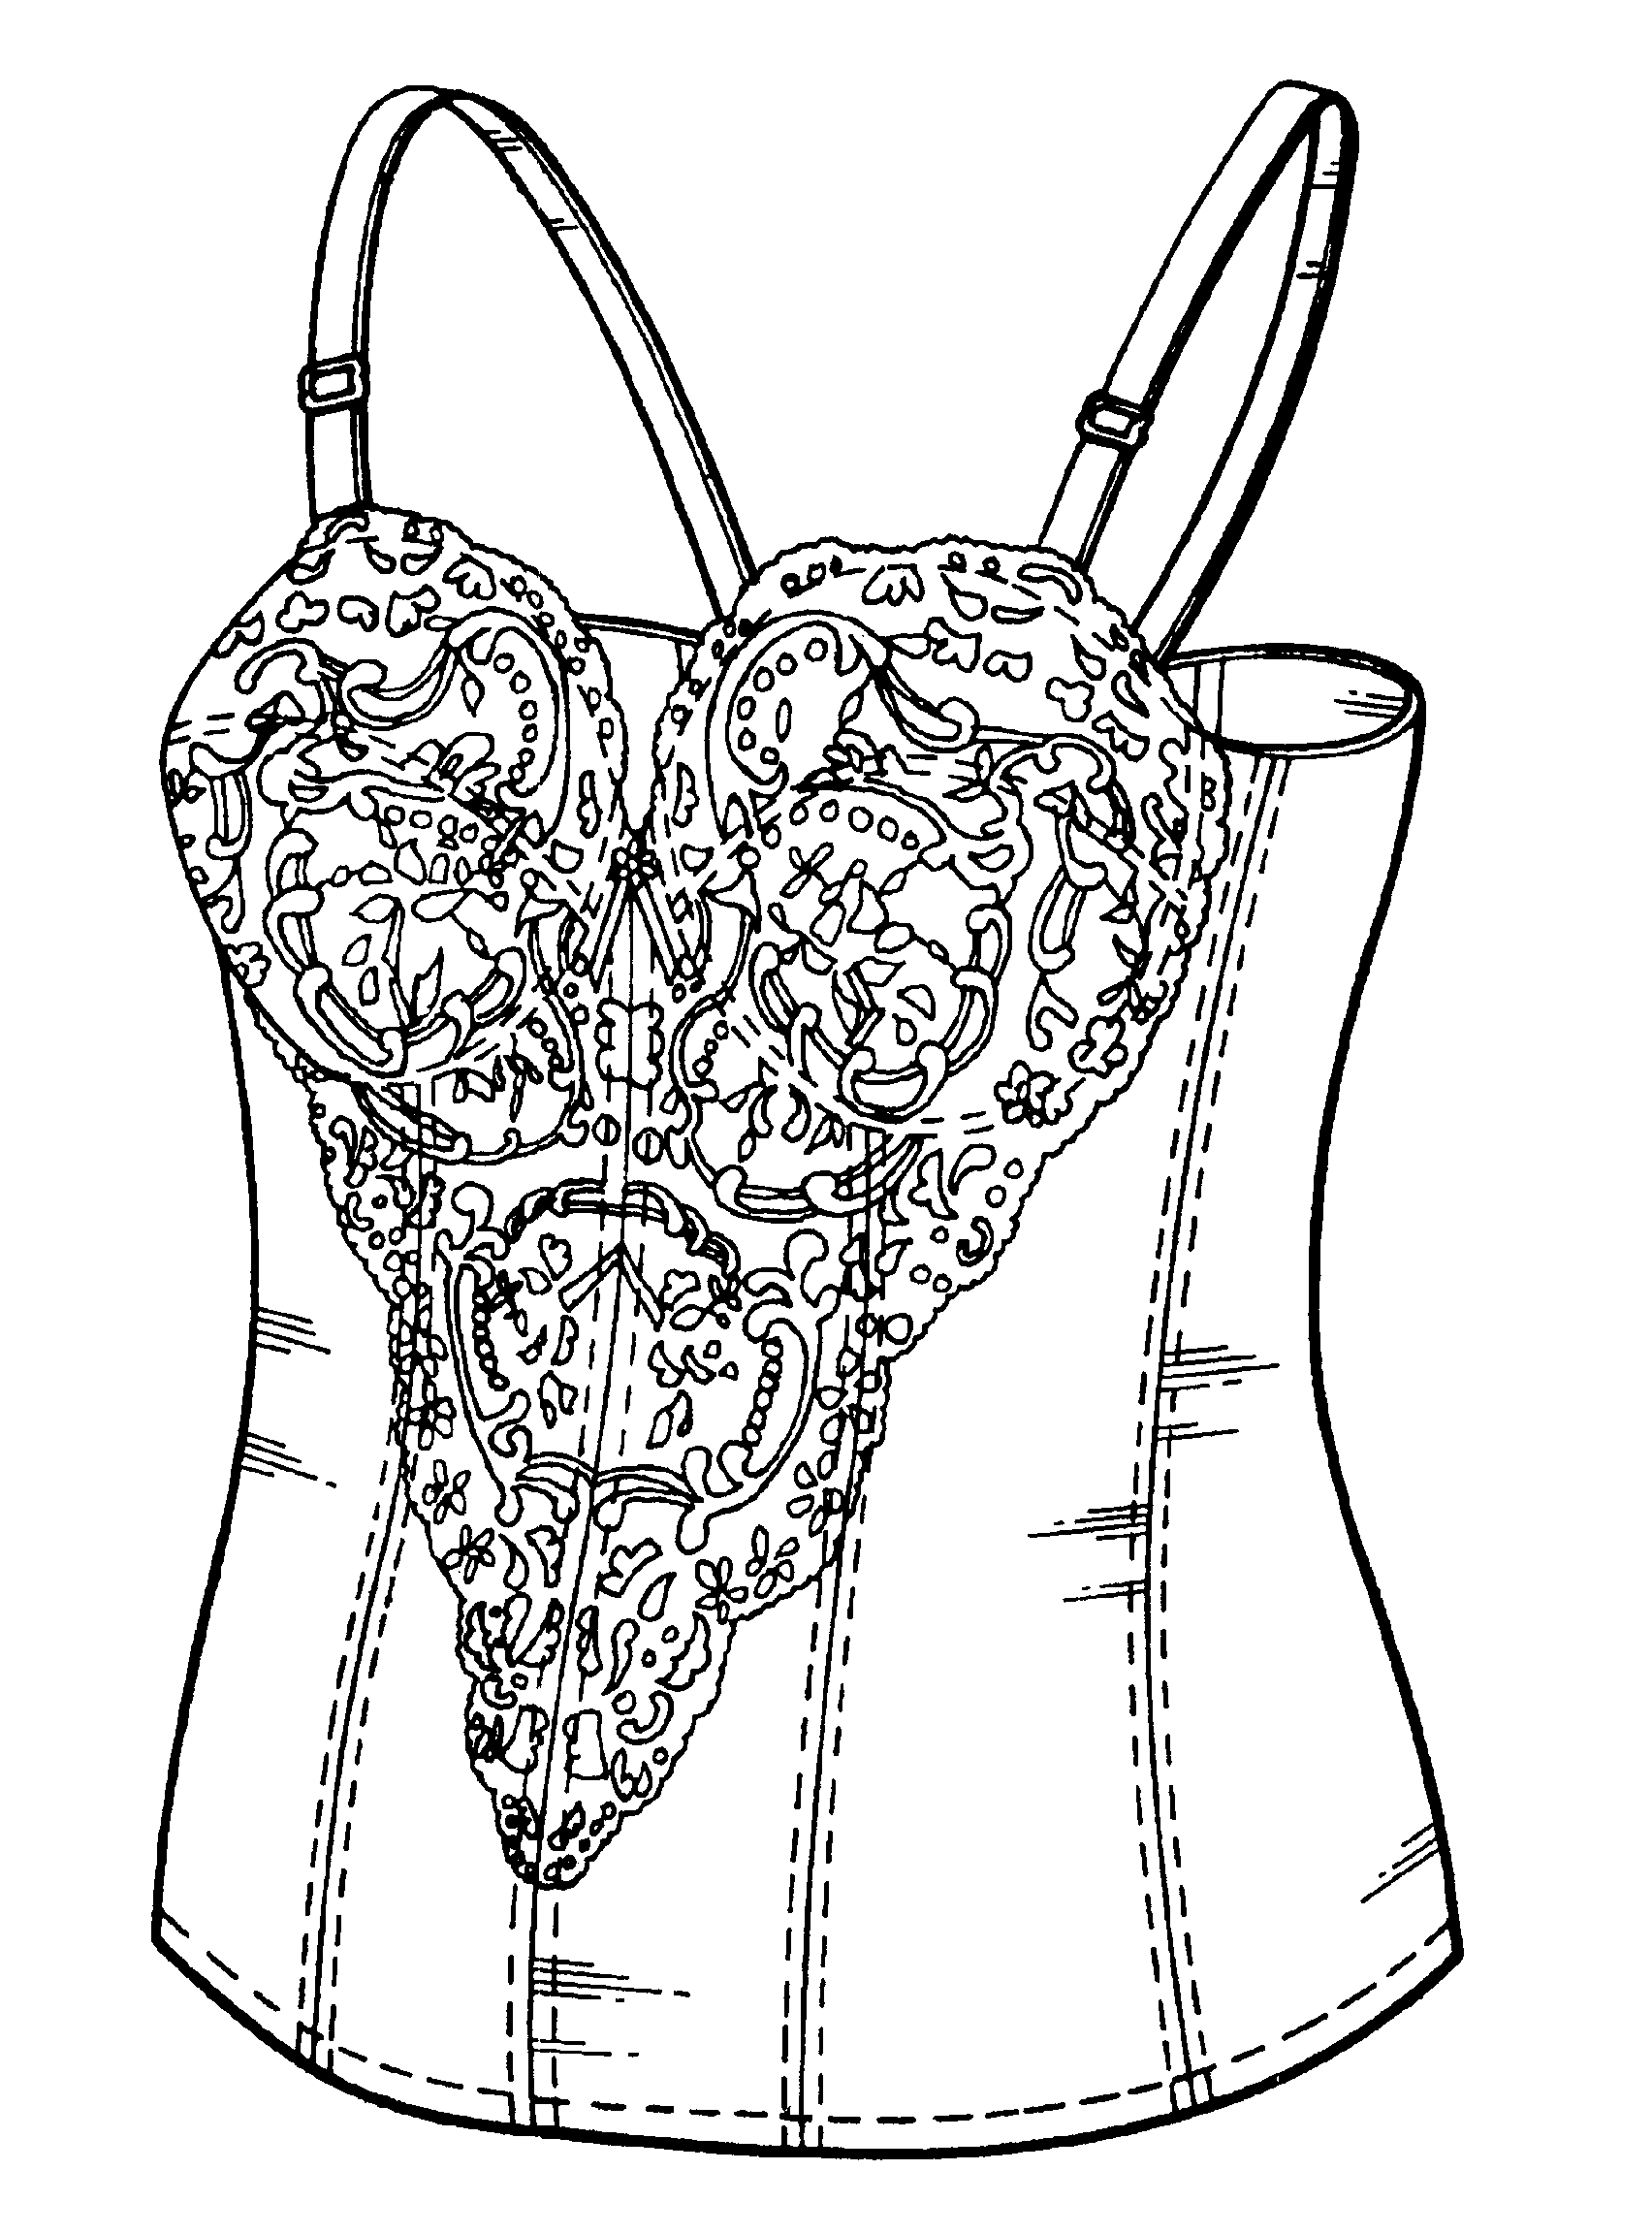 example of a design for a bra